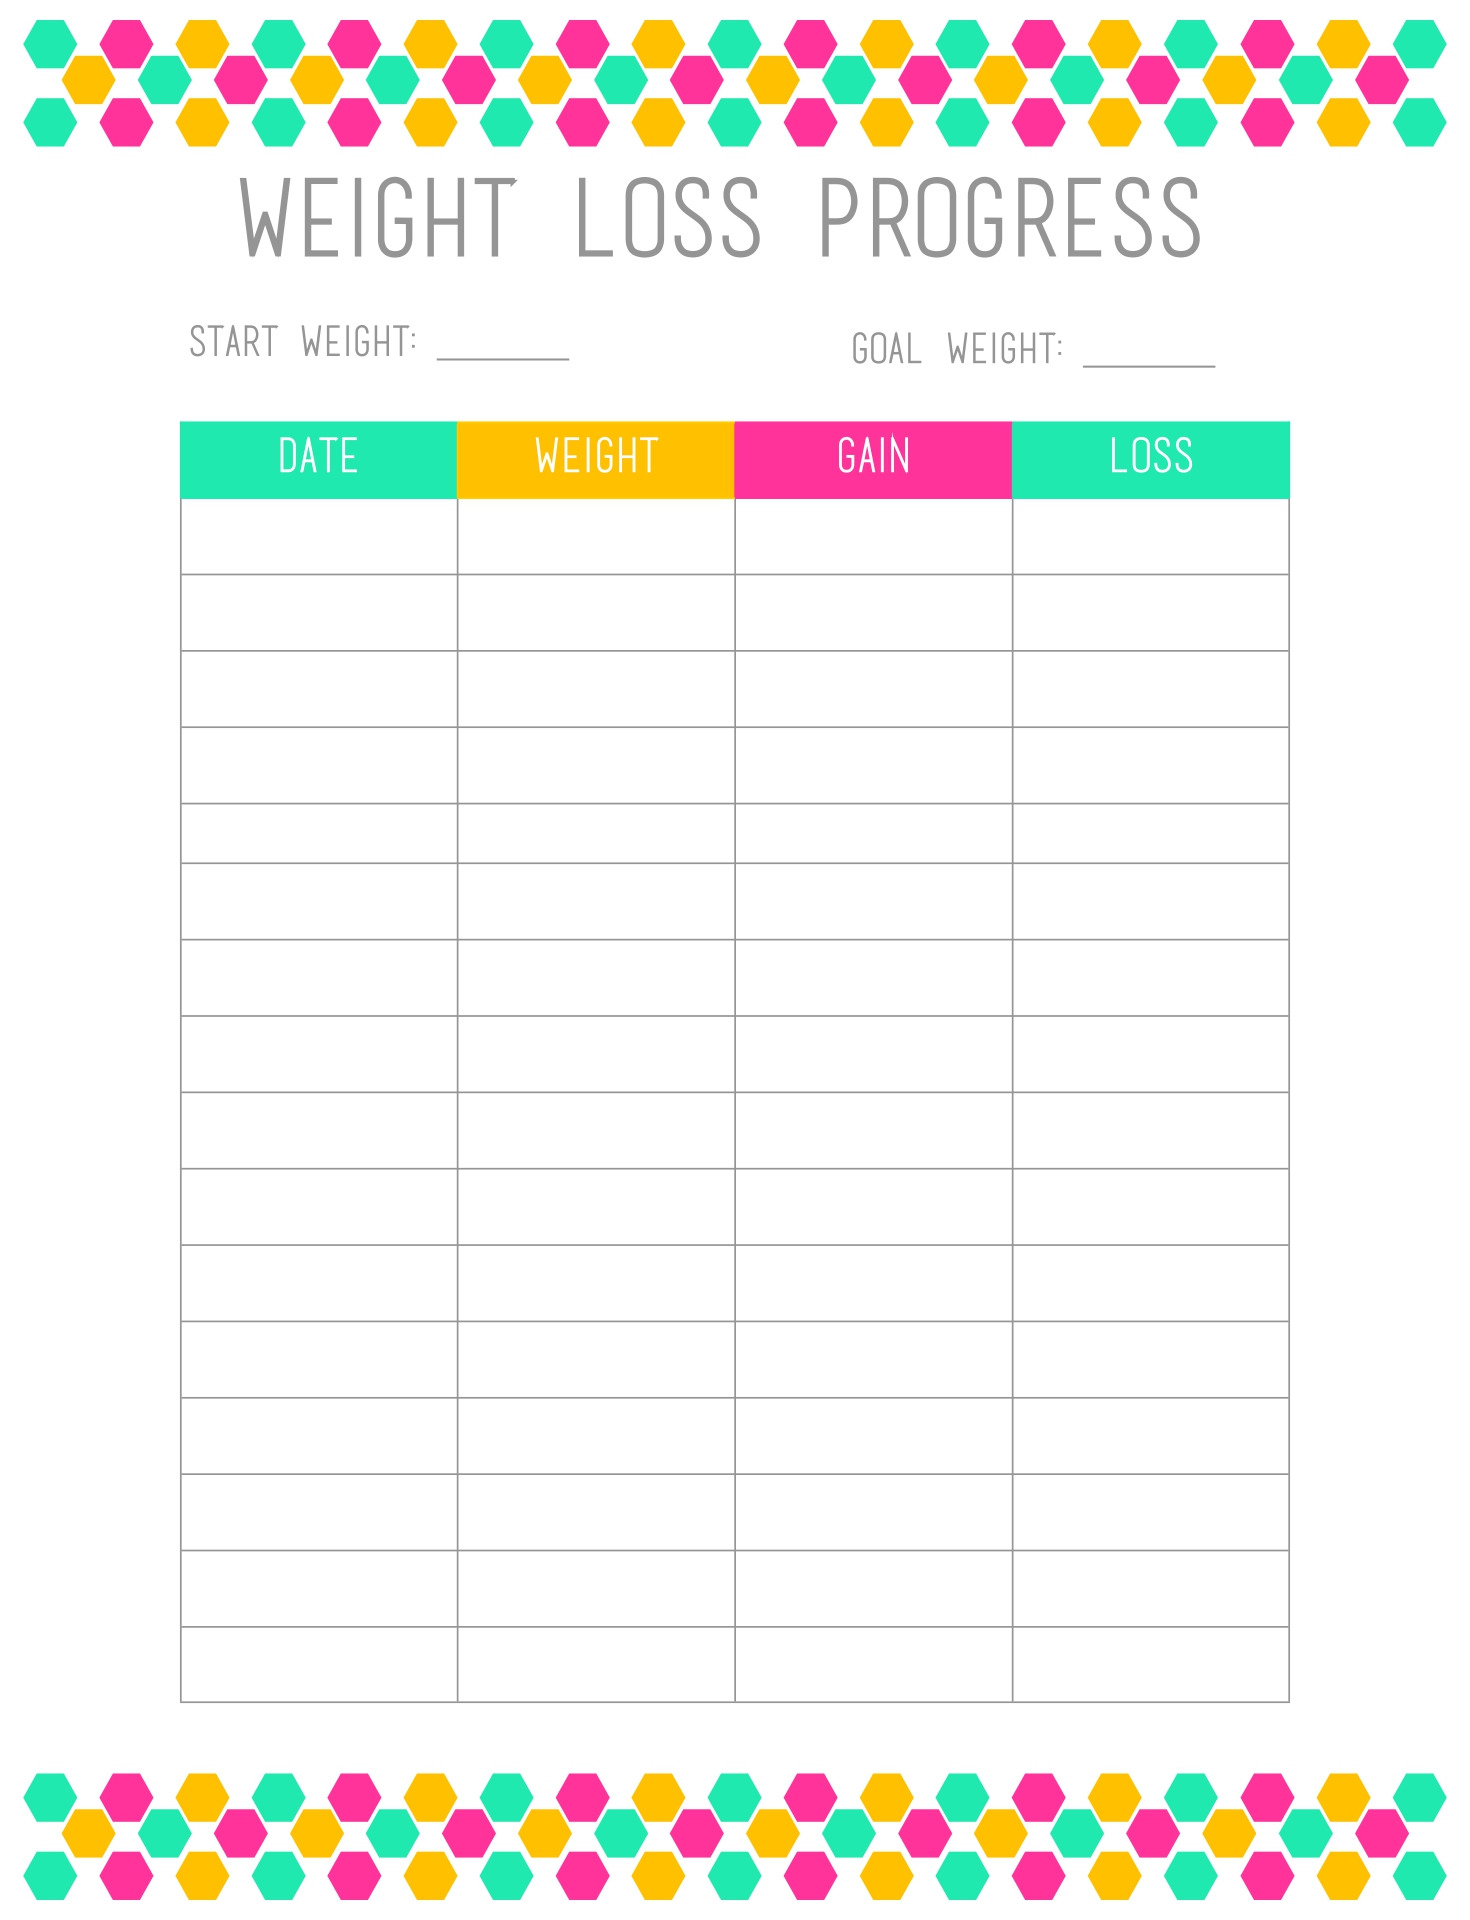 7 Best Images of Week Chart Printable Weight Loss Weight Loss Chart